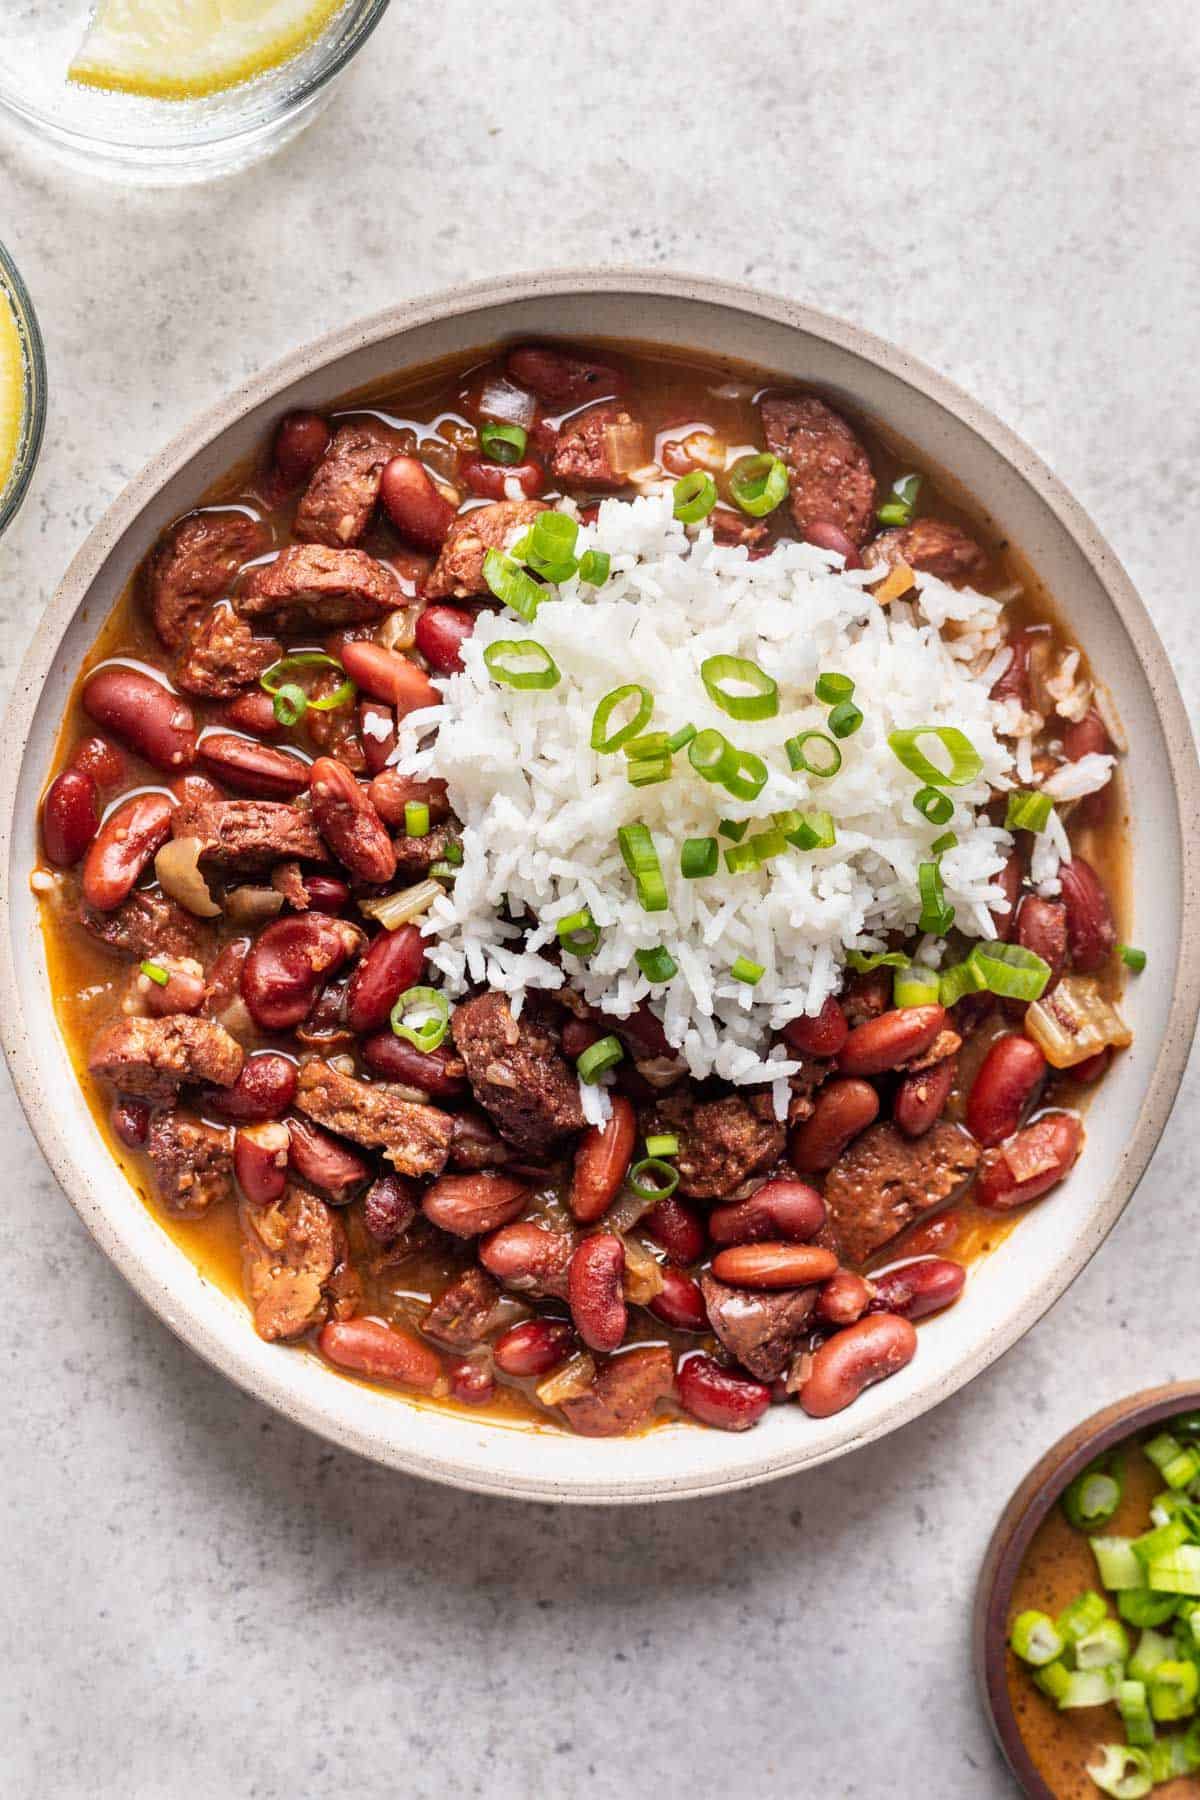 Final serving of instant pot red beans and rice.